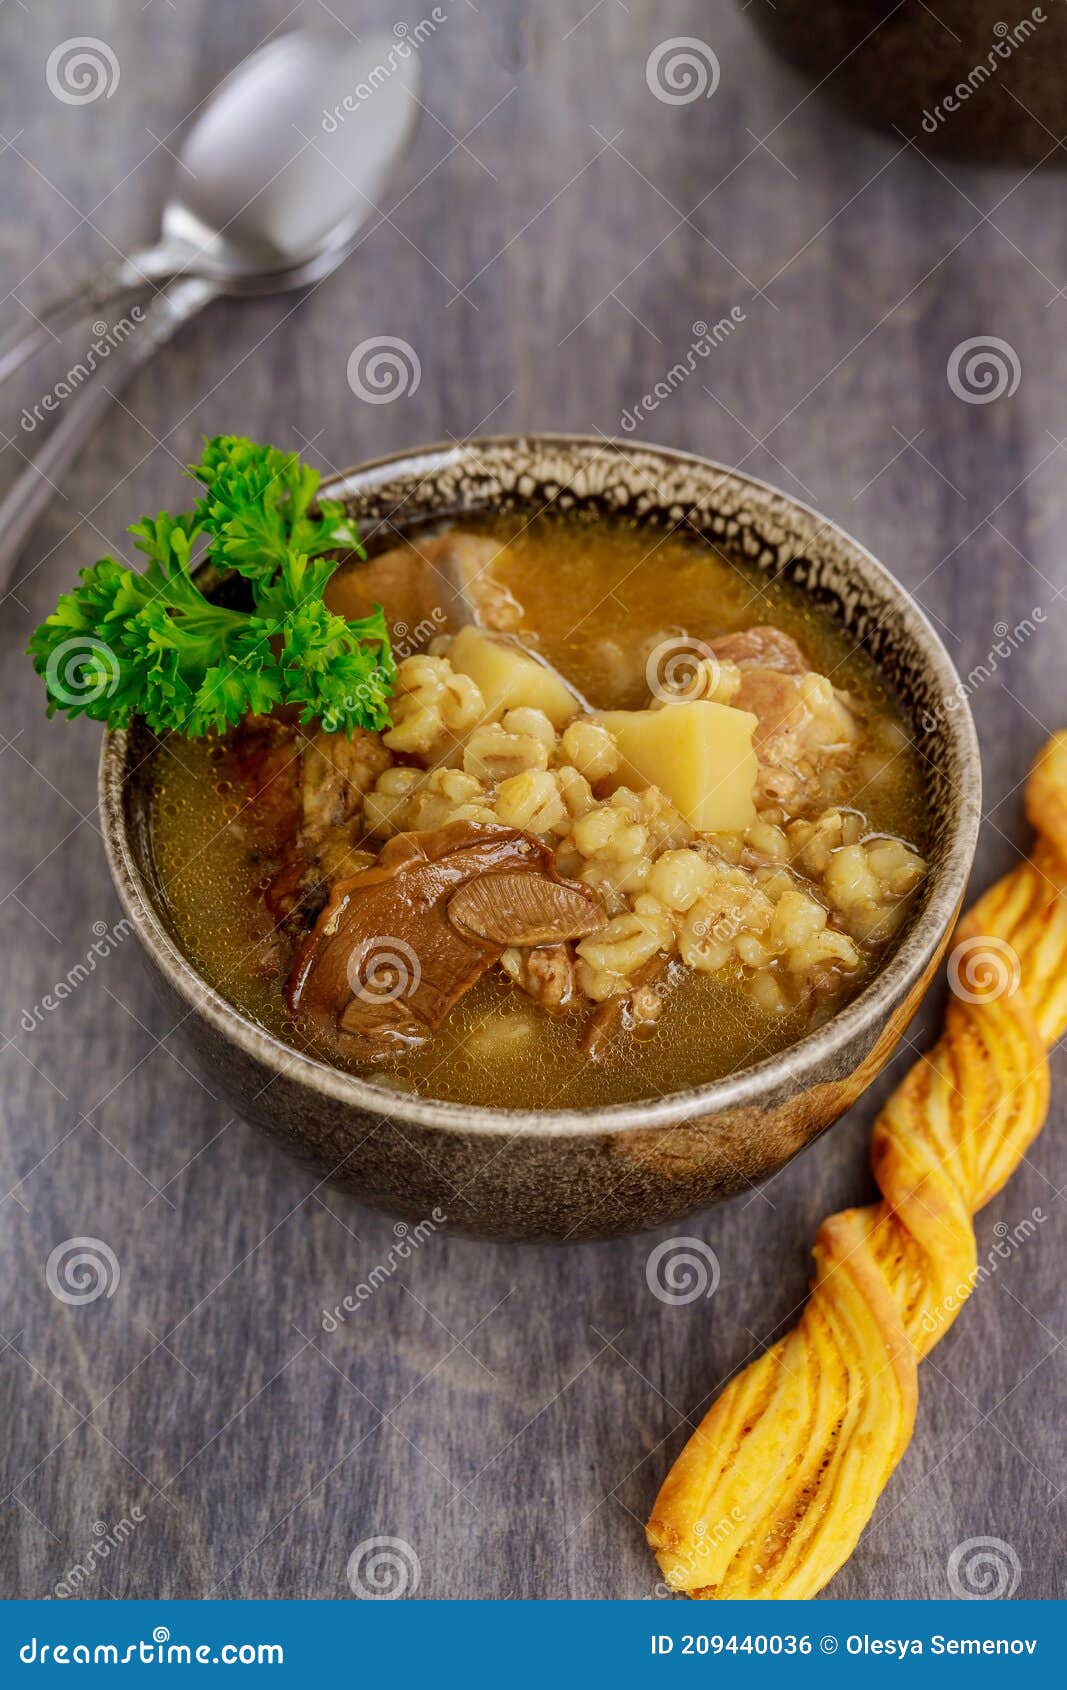 Pearl Barley Soup with Mushrooms and Potato Stock Photo - Image of ...